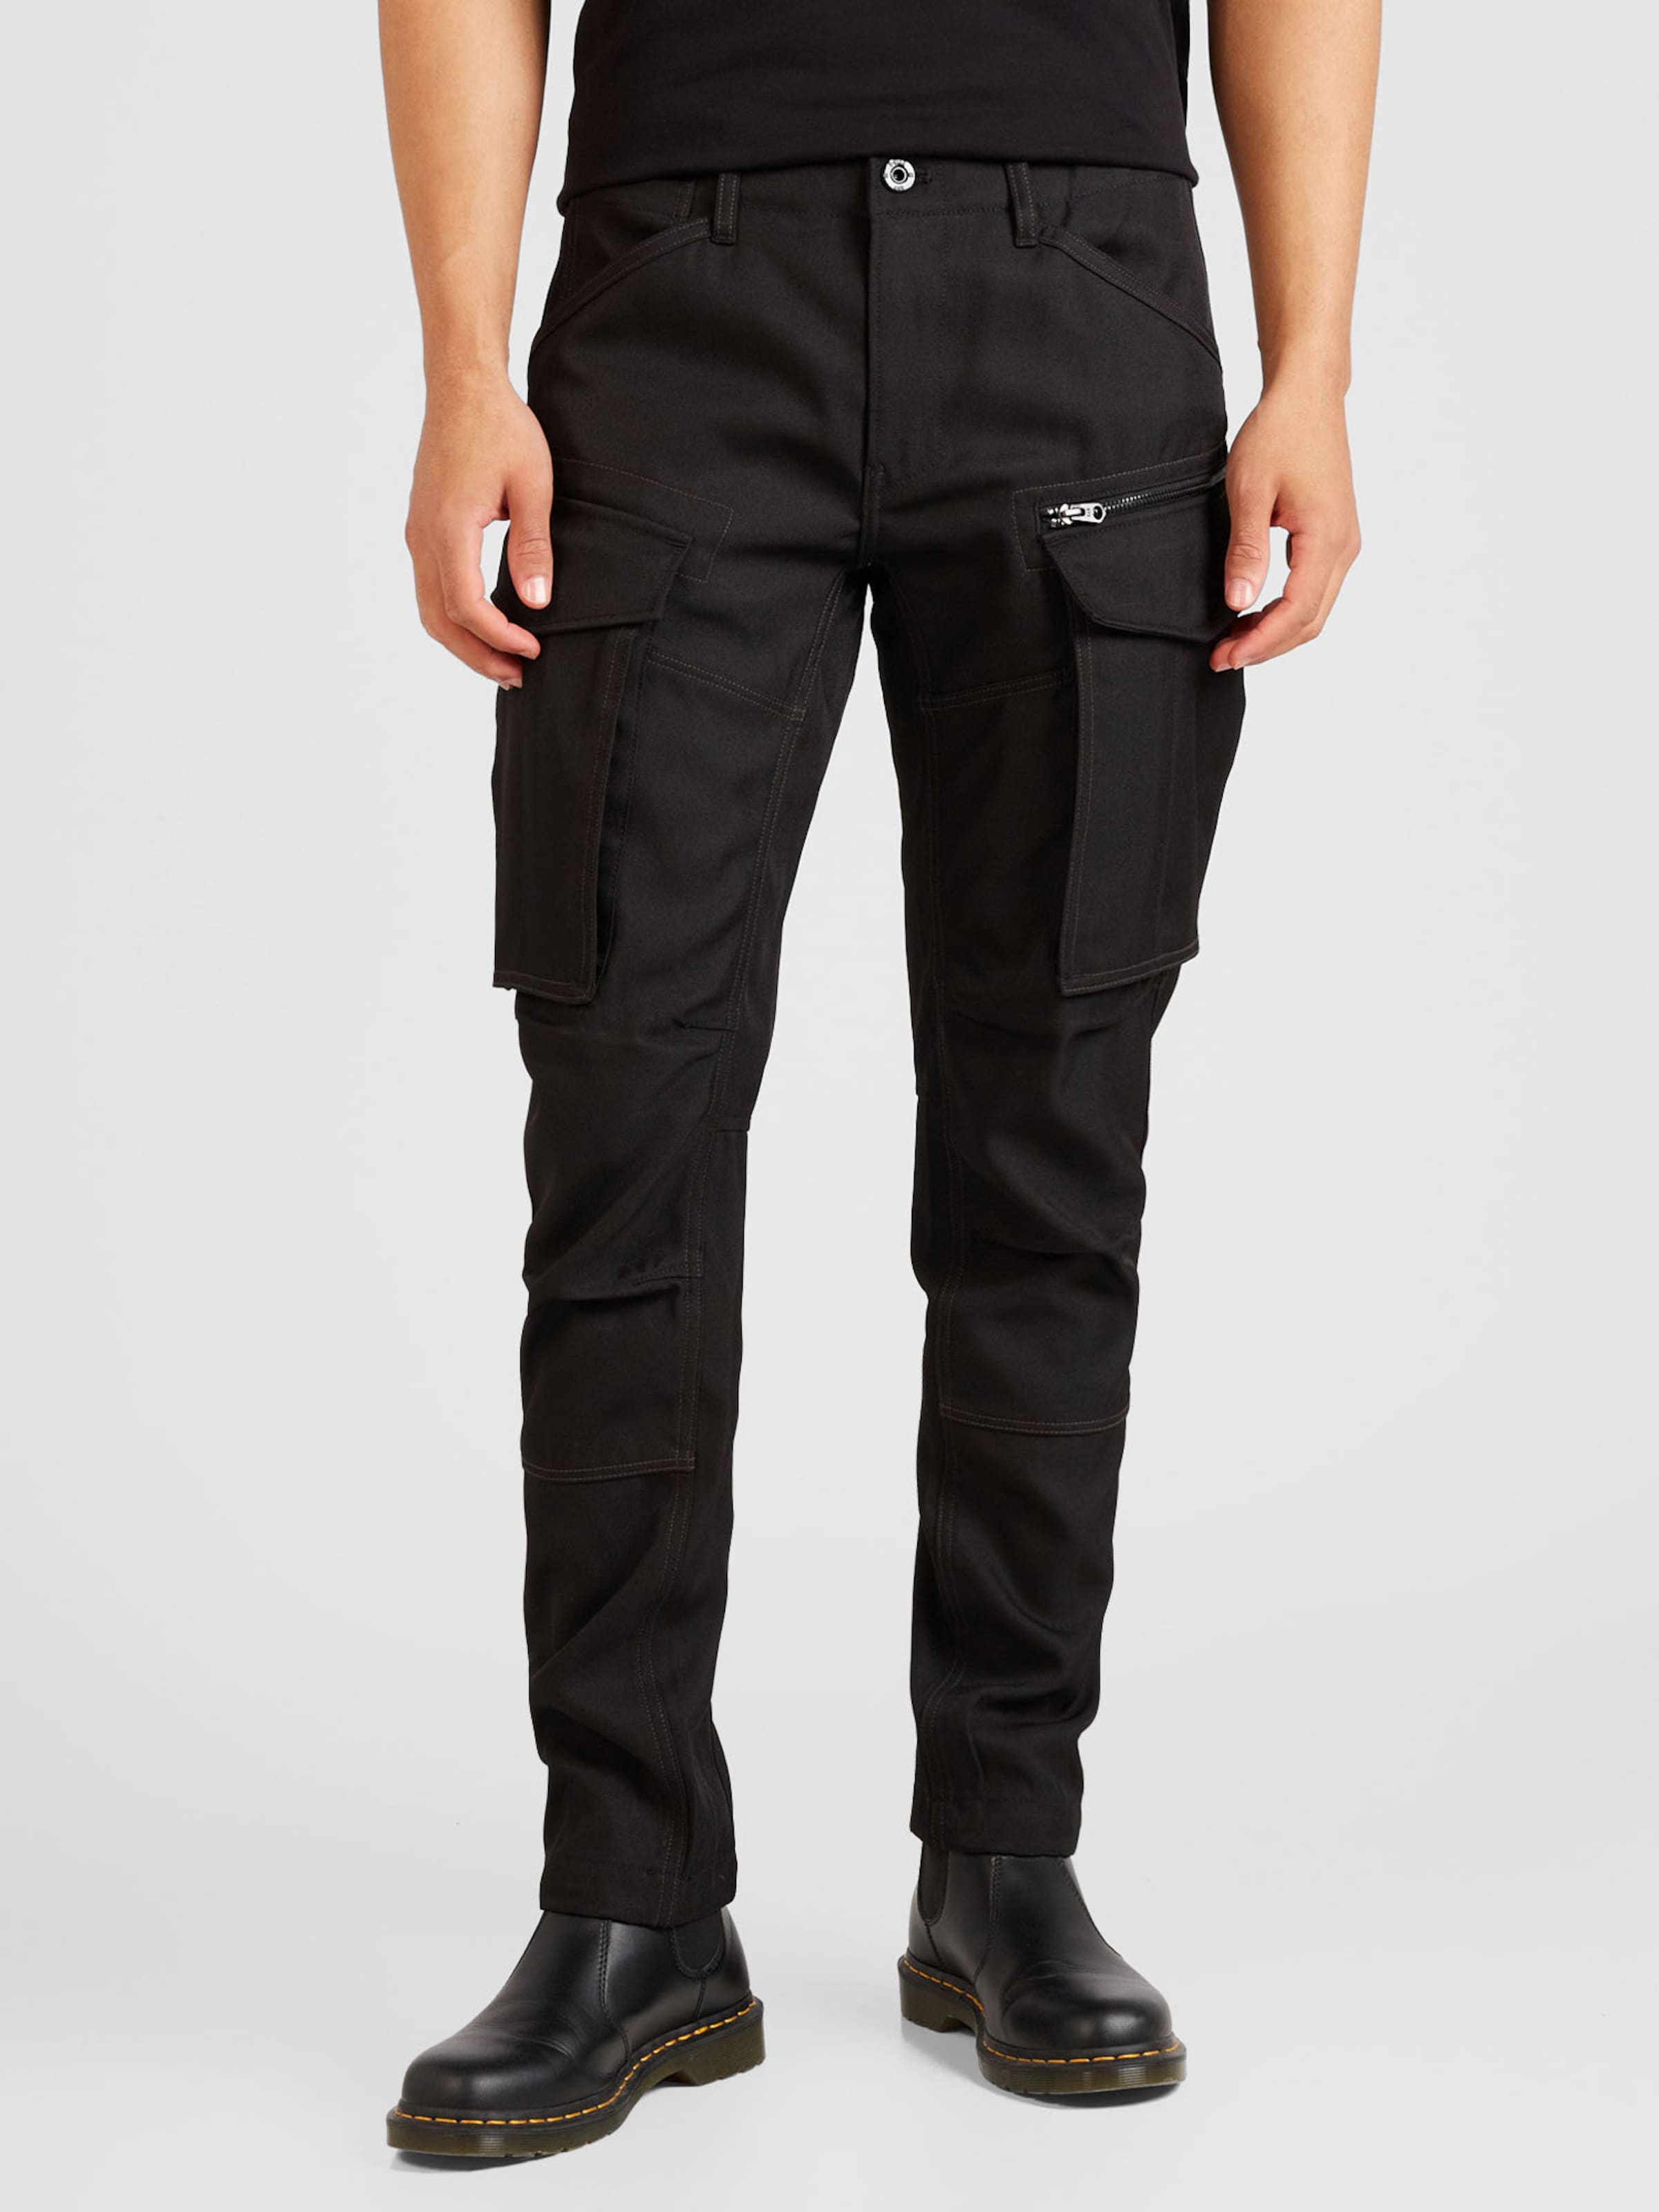 Black G-star Raw Mens Casual Trouser, Size: 28-34 Inch at Rs 400 in Chennai